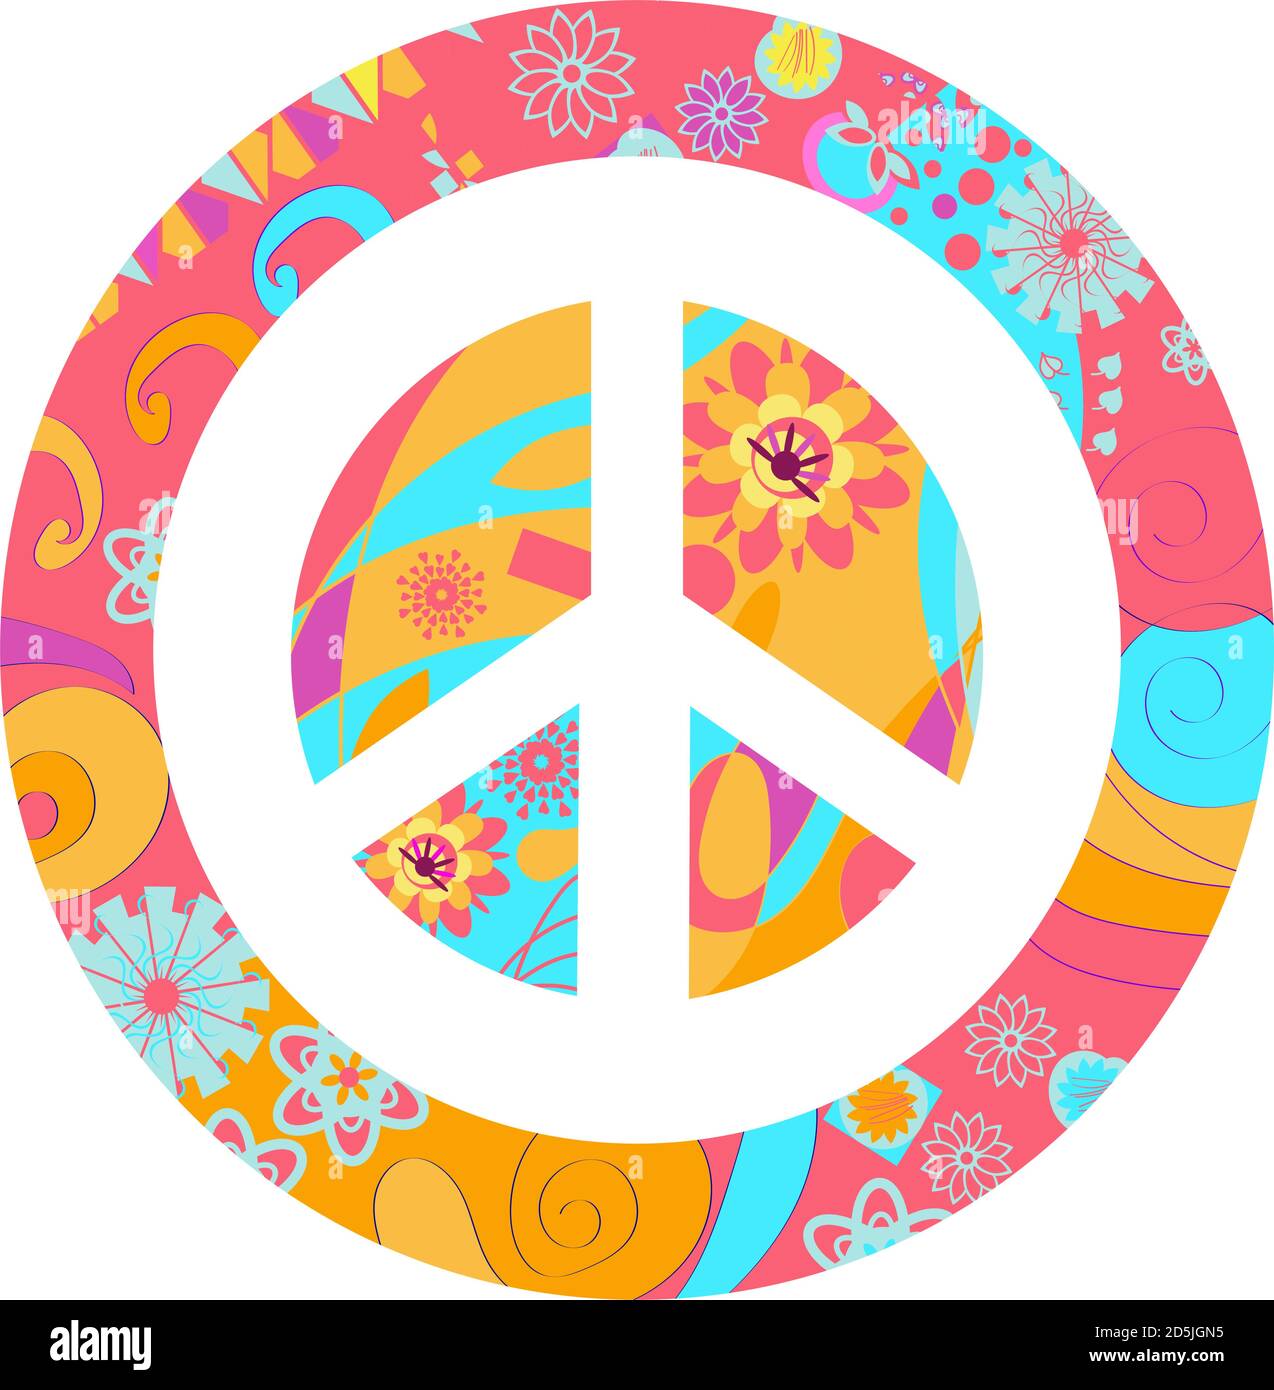 Peace sign vector illustration Stock Vector